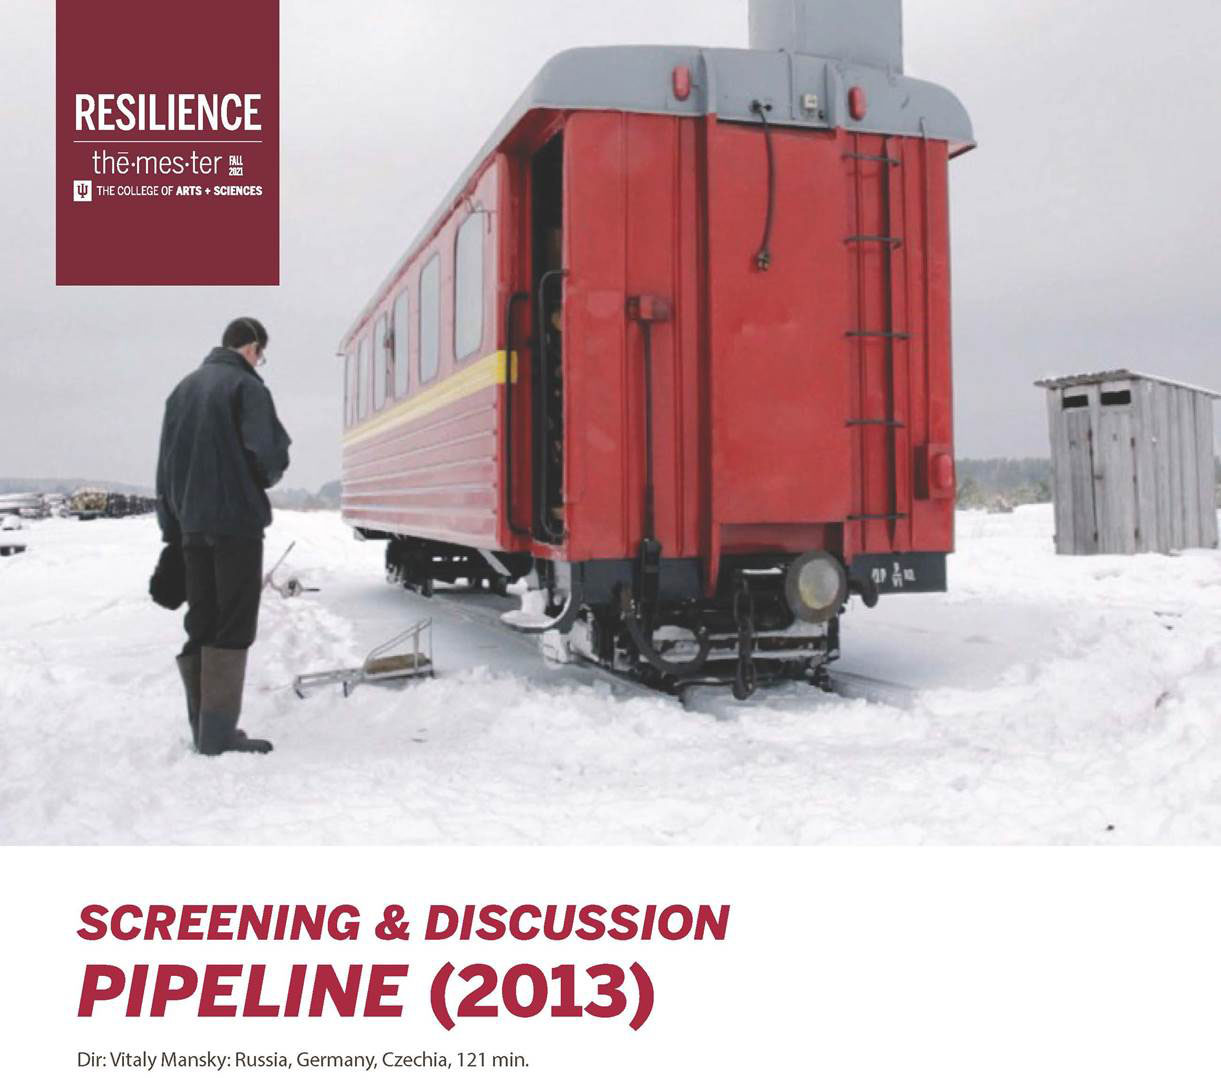 A portion of the "Pipeline" screening and discussion poster featuring an image of a man standing beside a red train car in the snow. Text at the top left corner reads: "RESILIENCE. Themester. The College of Arts + Sciences." Text below the image reads: "Screening & Discussion: Pipeline (2013). Dir: Vitaly Mansky: Russia, Germany, Czechia, 121 min."